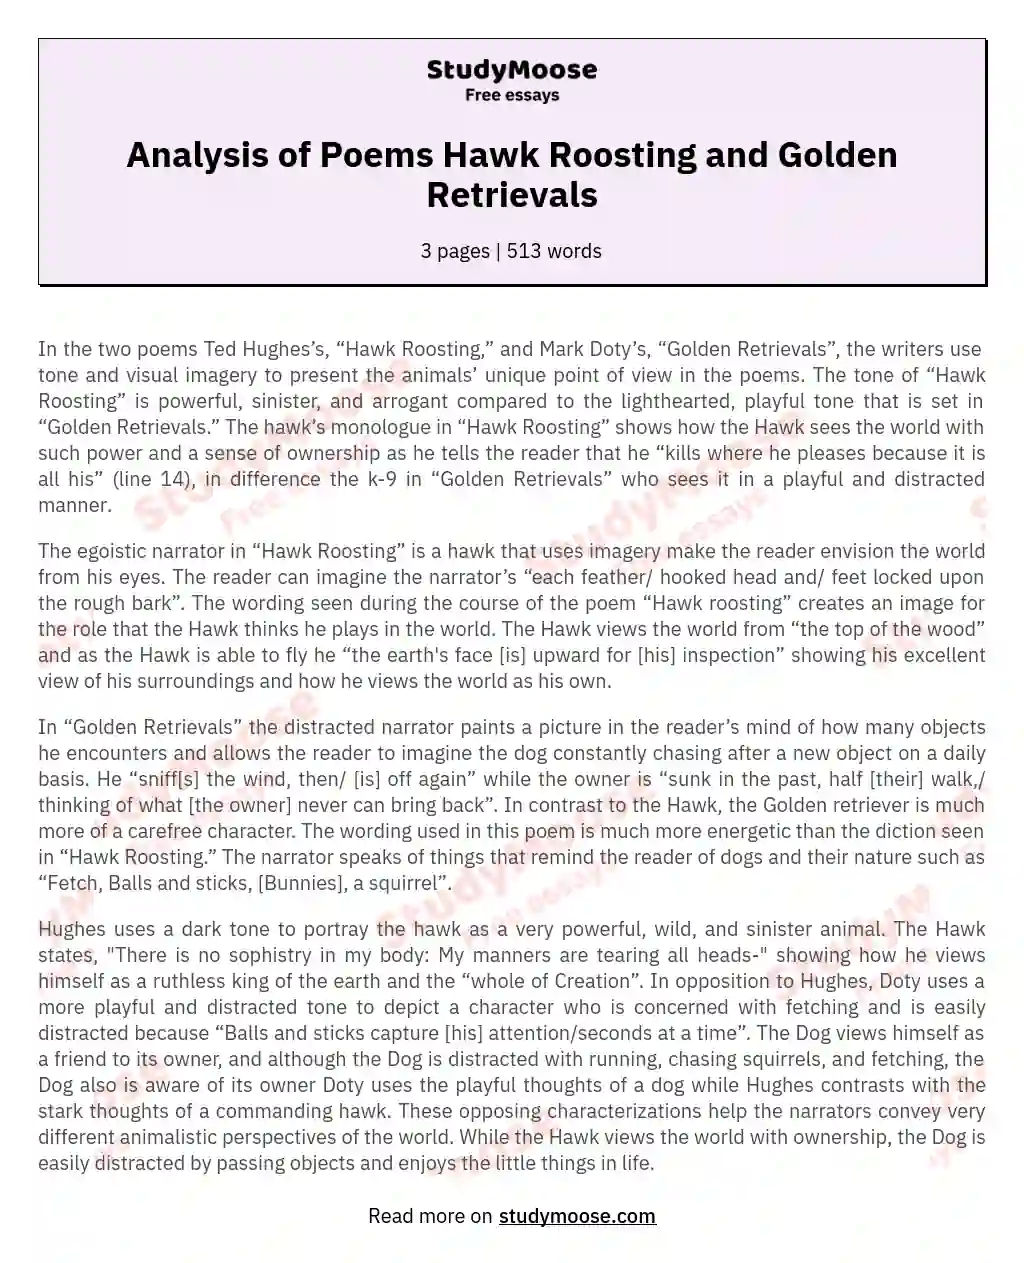 Analysis of Poems Hawk Roosting and Golden Retrievals